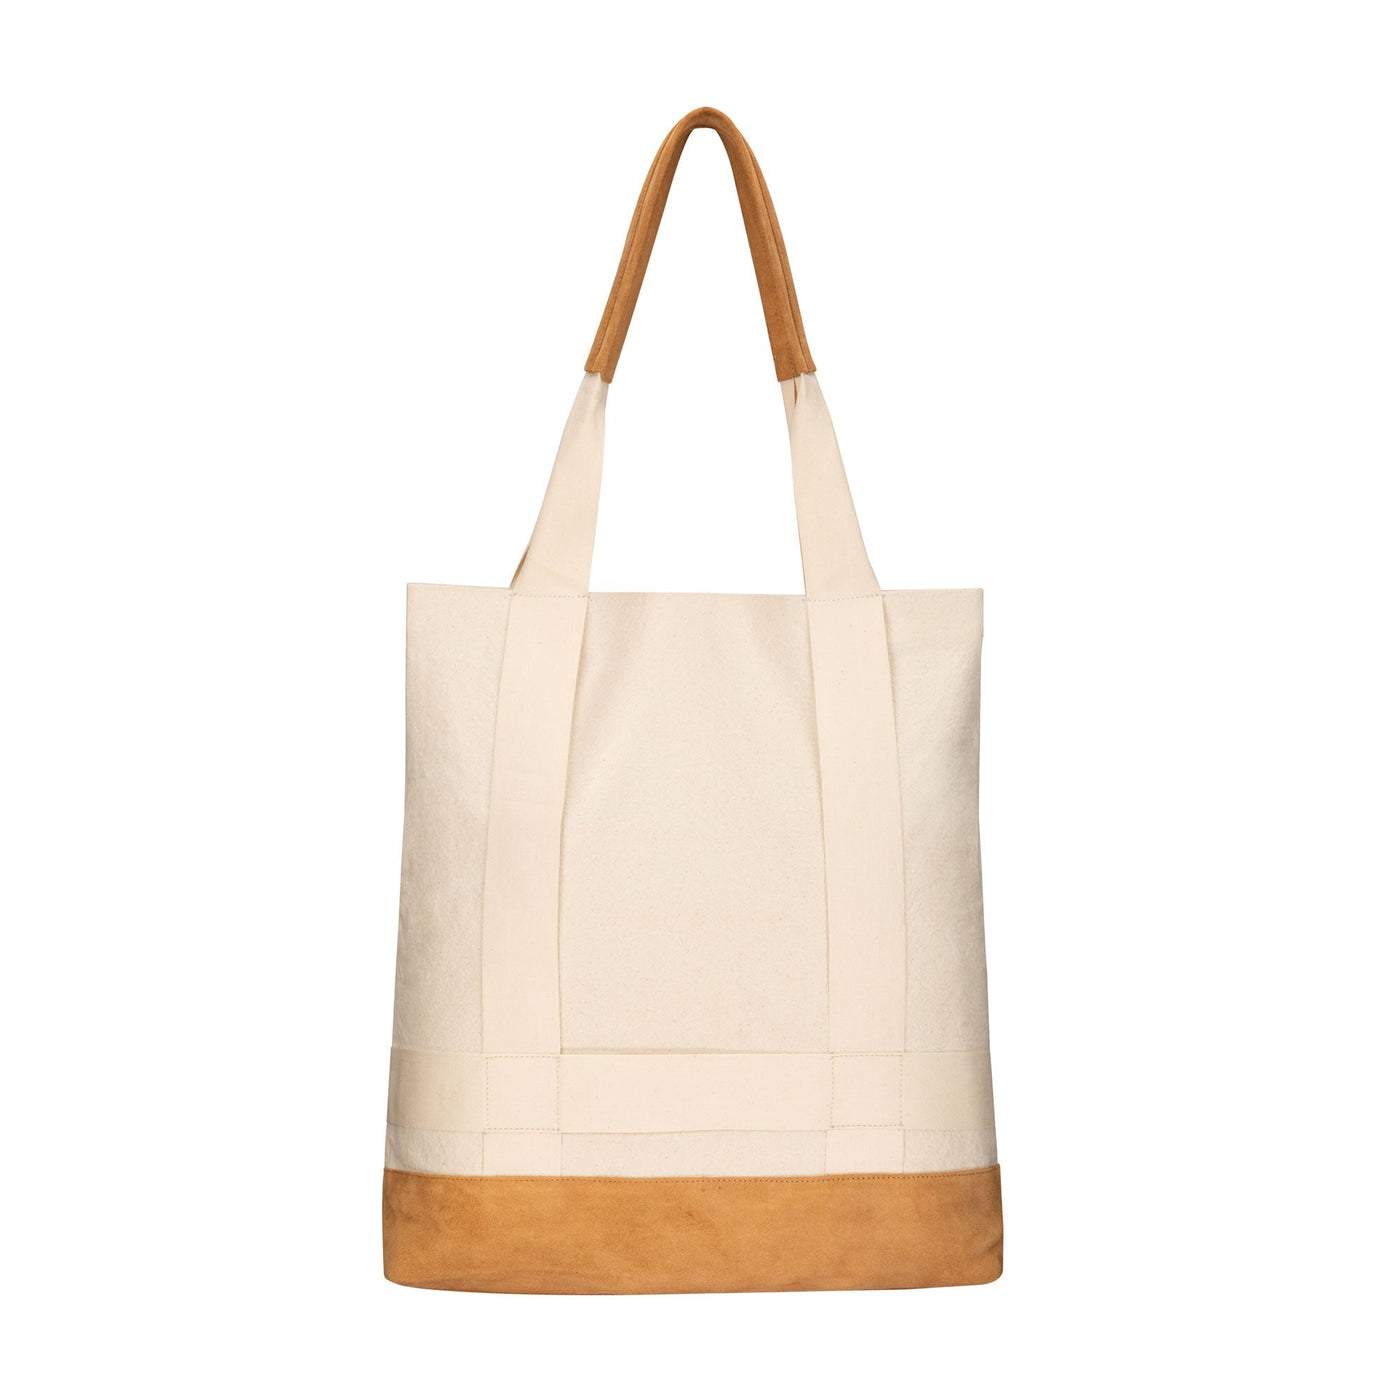 TOTE - Sunnylands - Canvas Tote With Canvas Hat Holder Straps